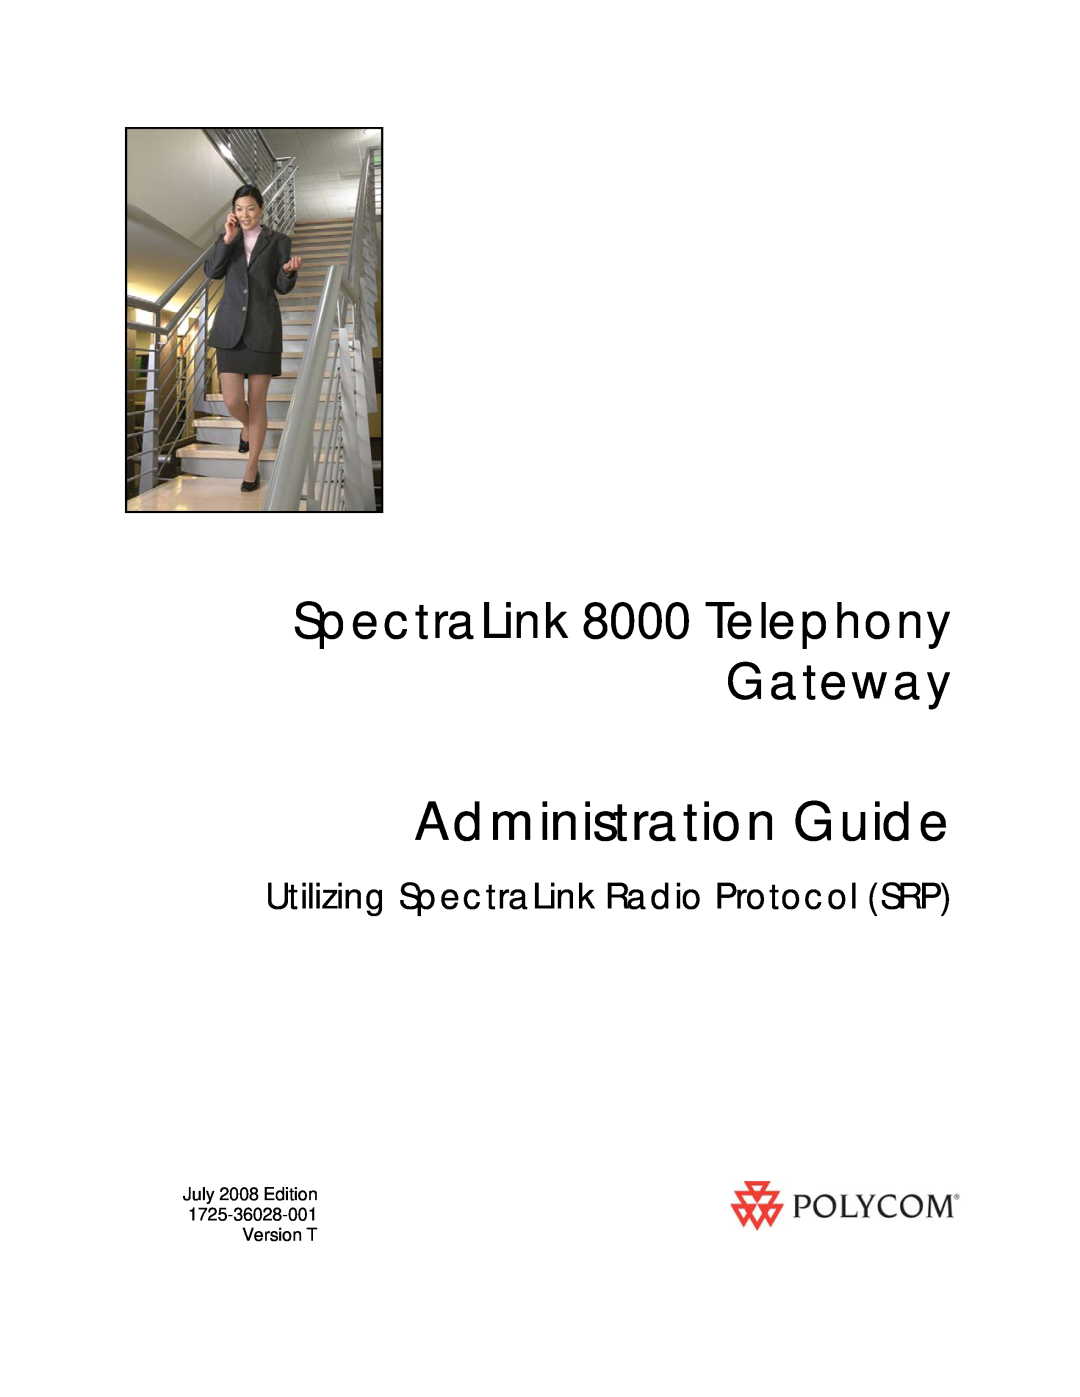 Polycom 1725-36028-001 manual Administration Guide, SpectraLink 8000 Telephony Gateway 